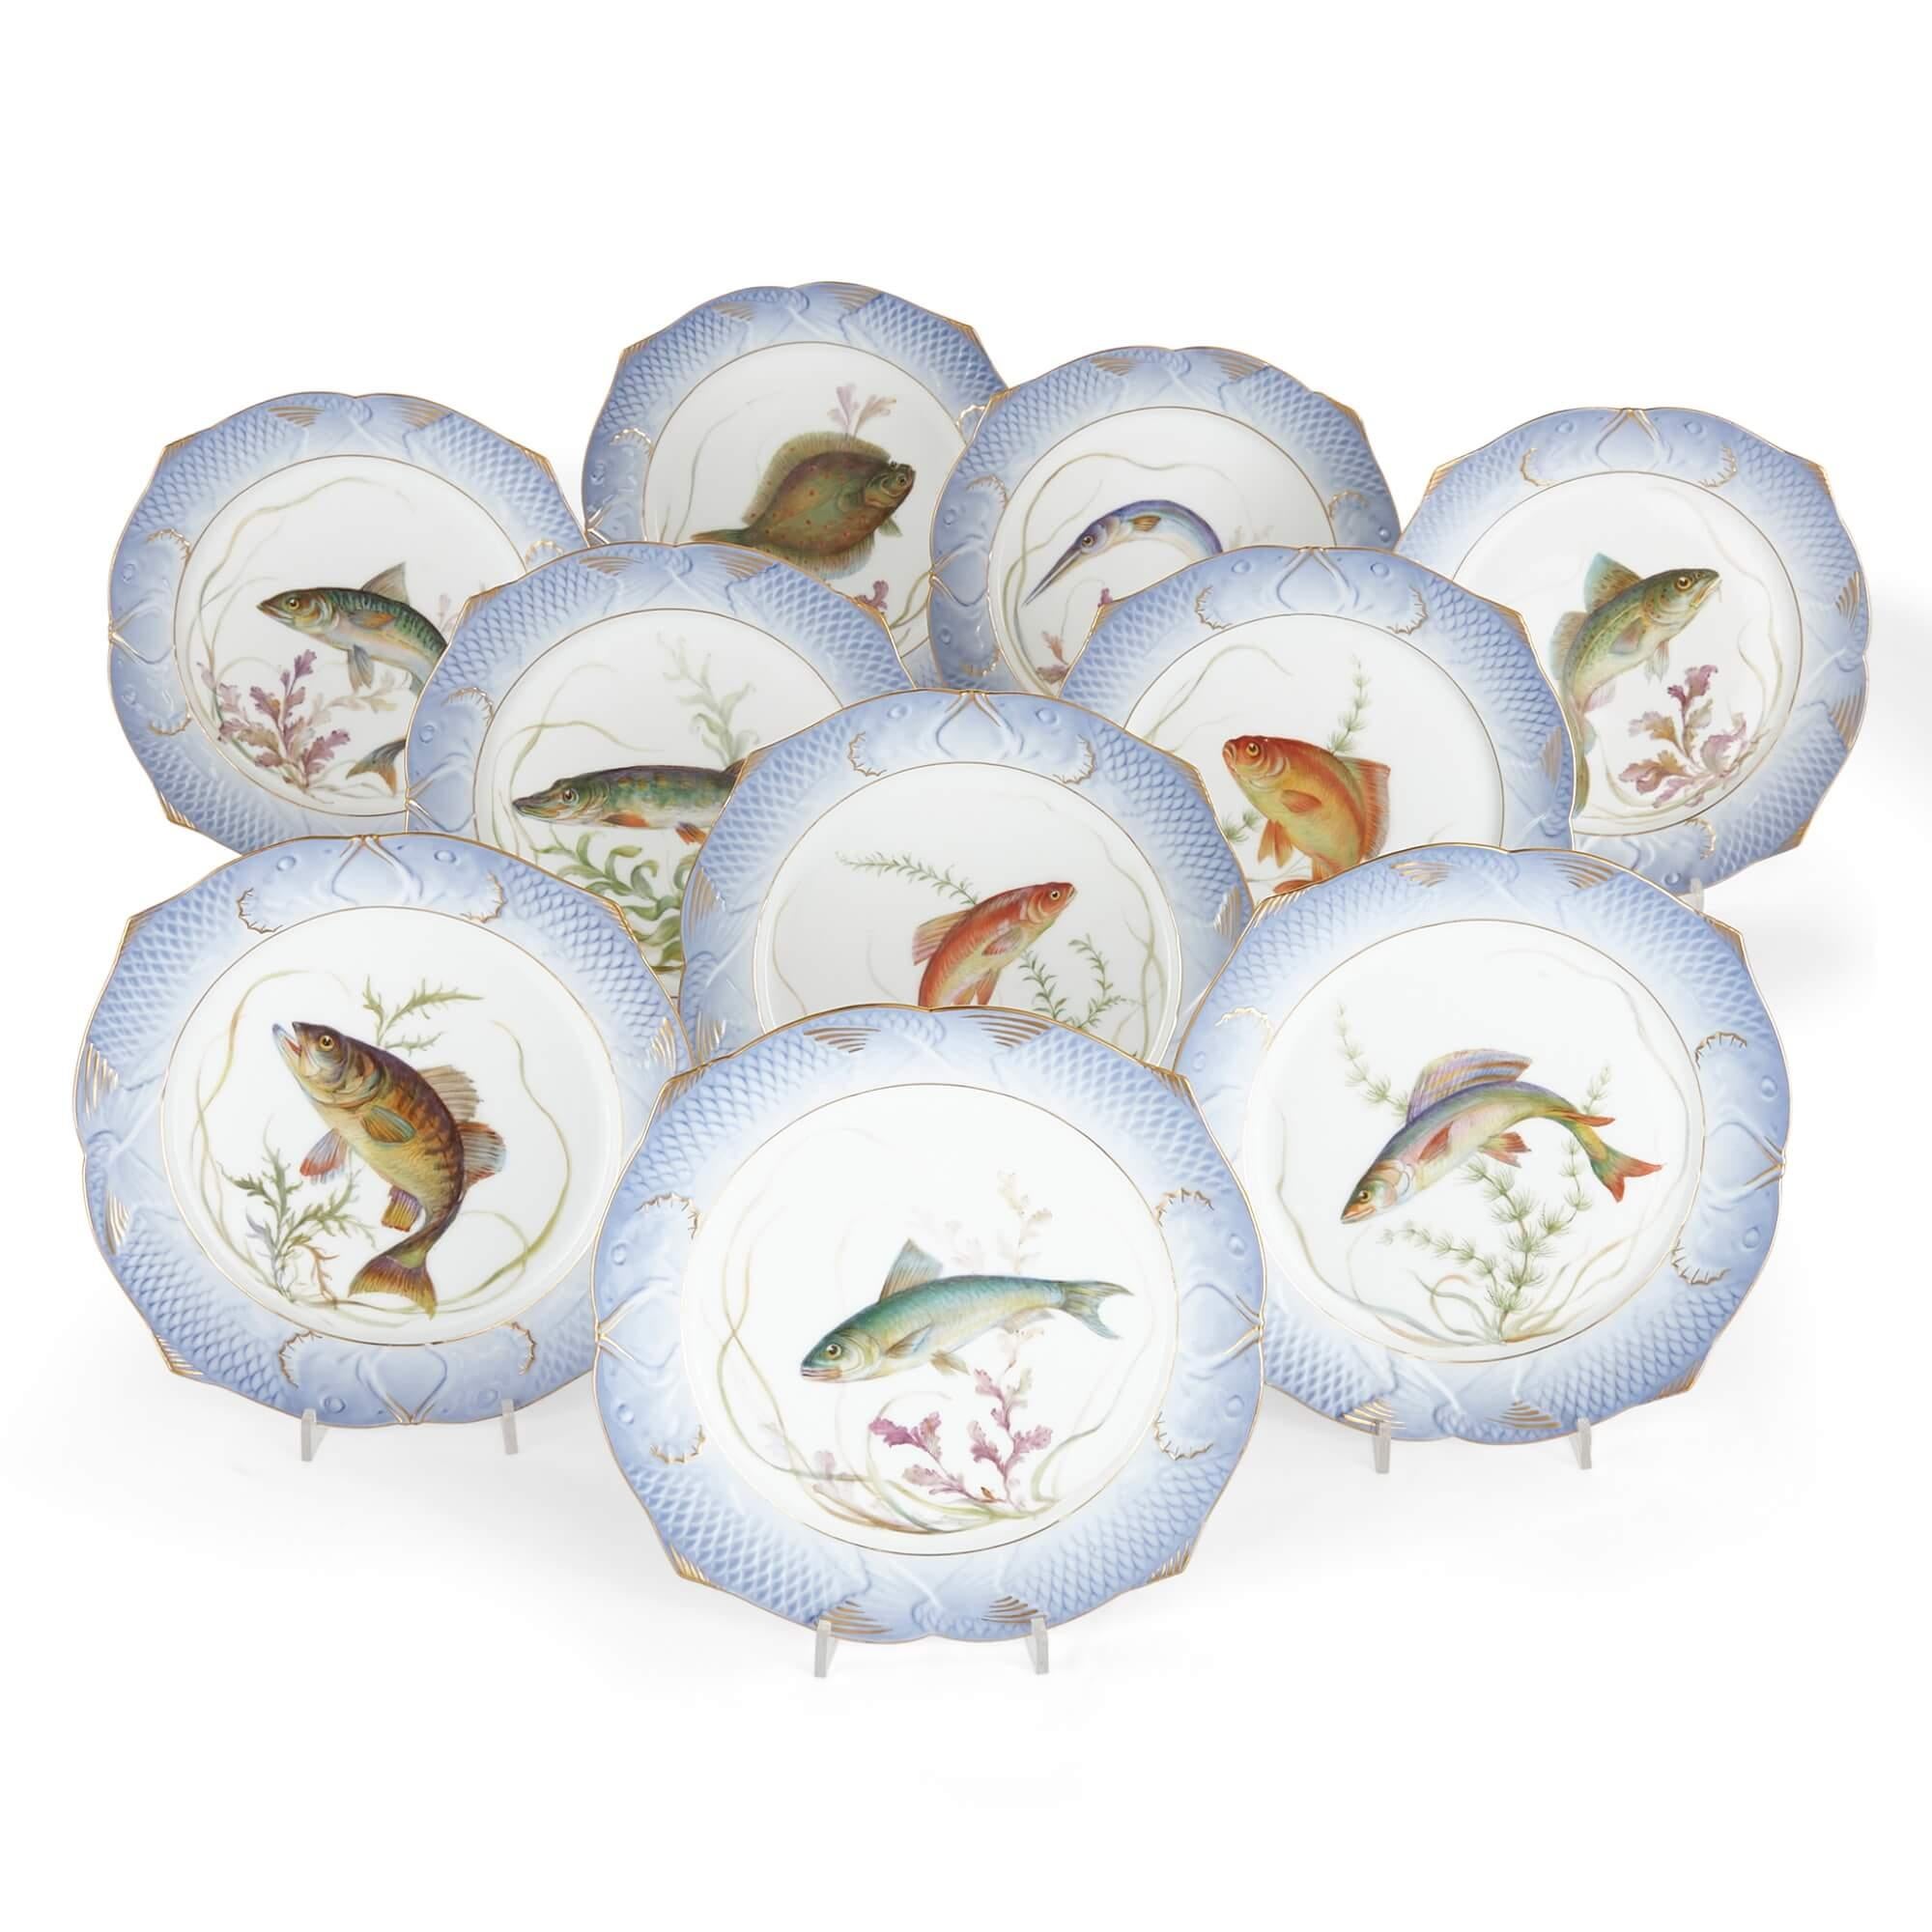 A Royal Copenhagen Ichthyological porcelain part dinner 'fish-service'
Danish, 20th century
Plates: height 2cm, diameter 24cm
Long dish: height 5cm, width 60cm, depth 24cm

Consisting of thirteen pieces: one circular tureen and cover, one gravy